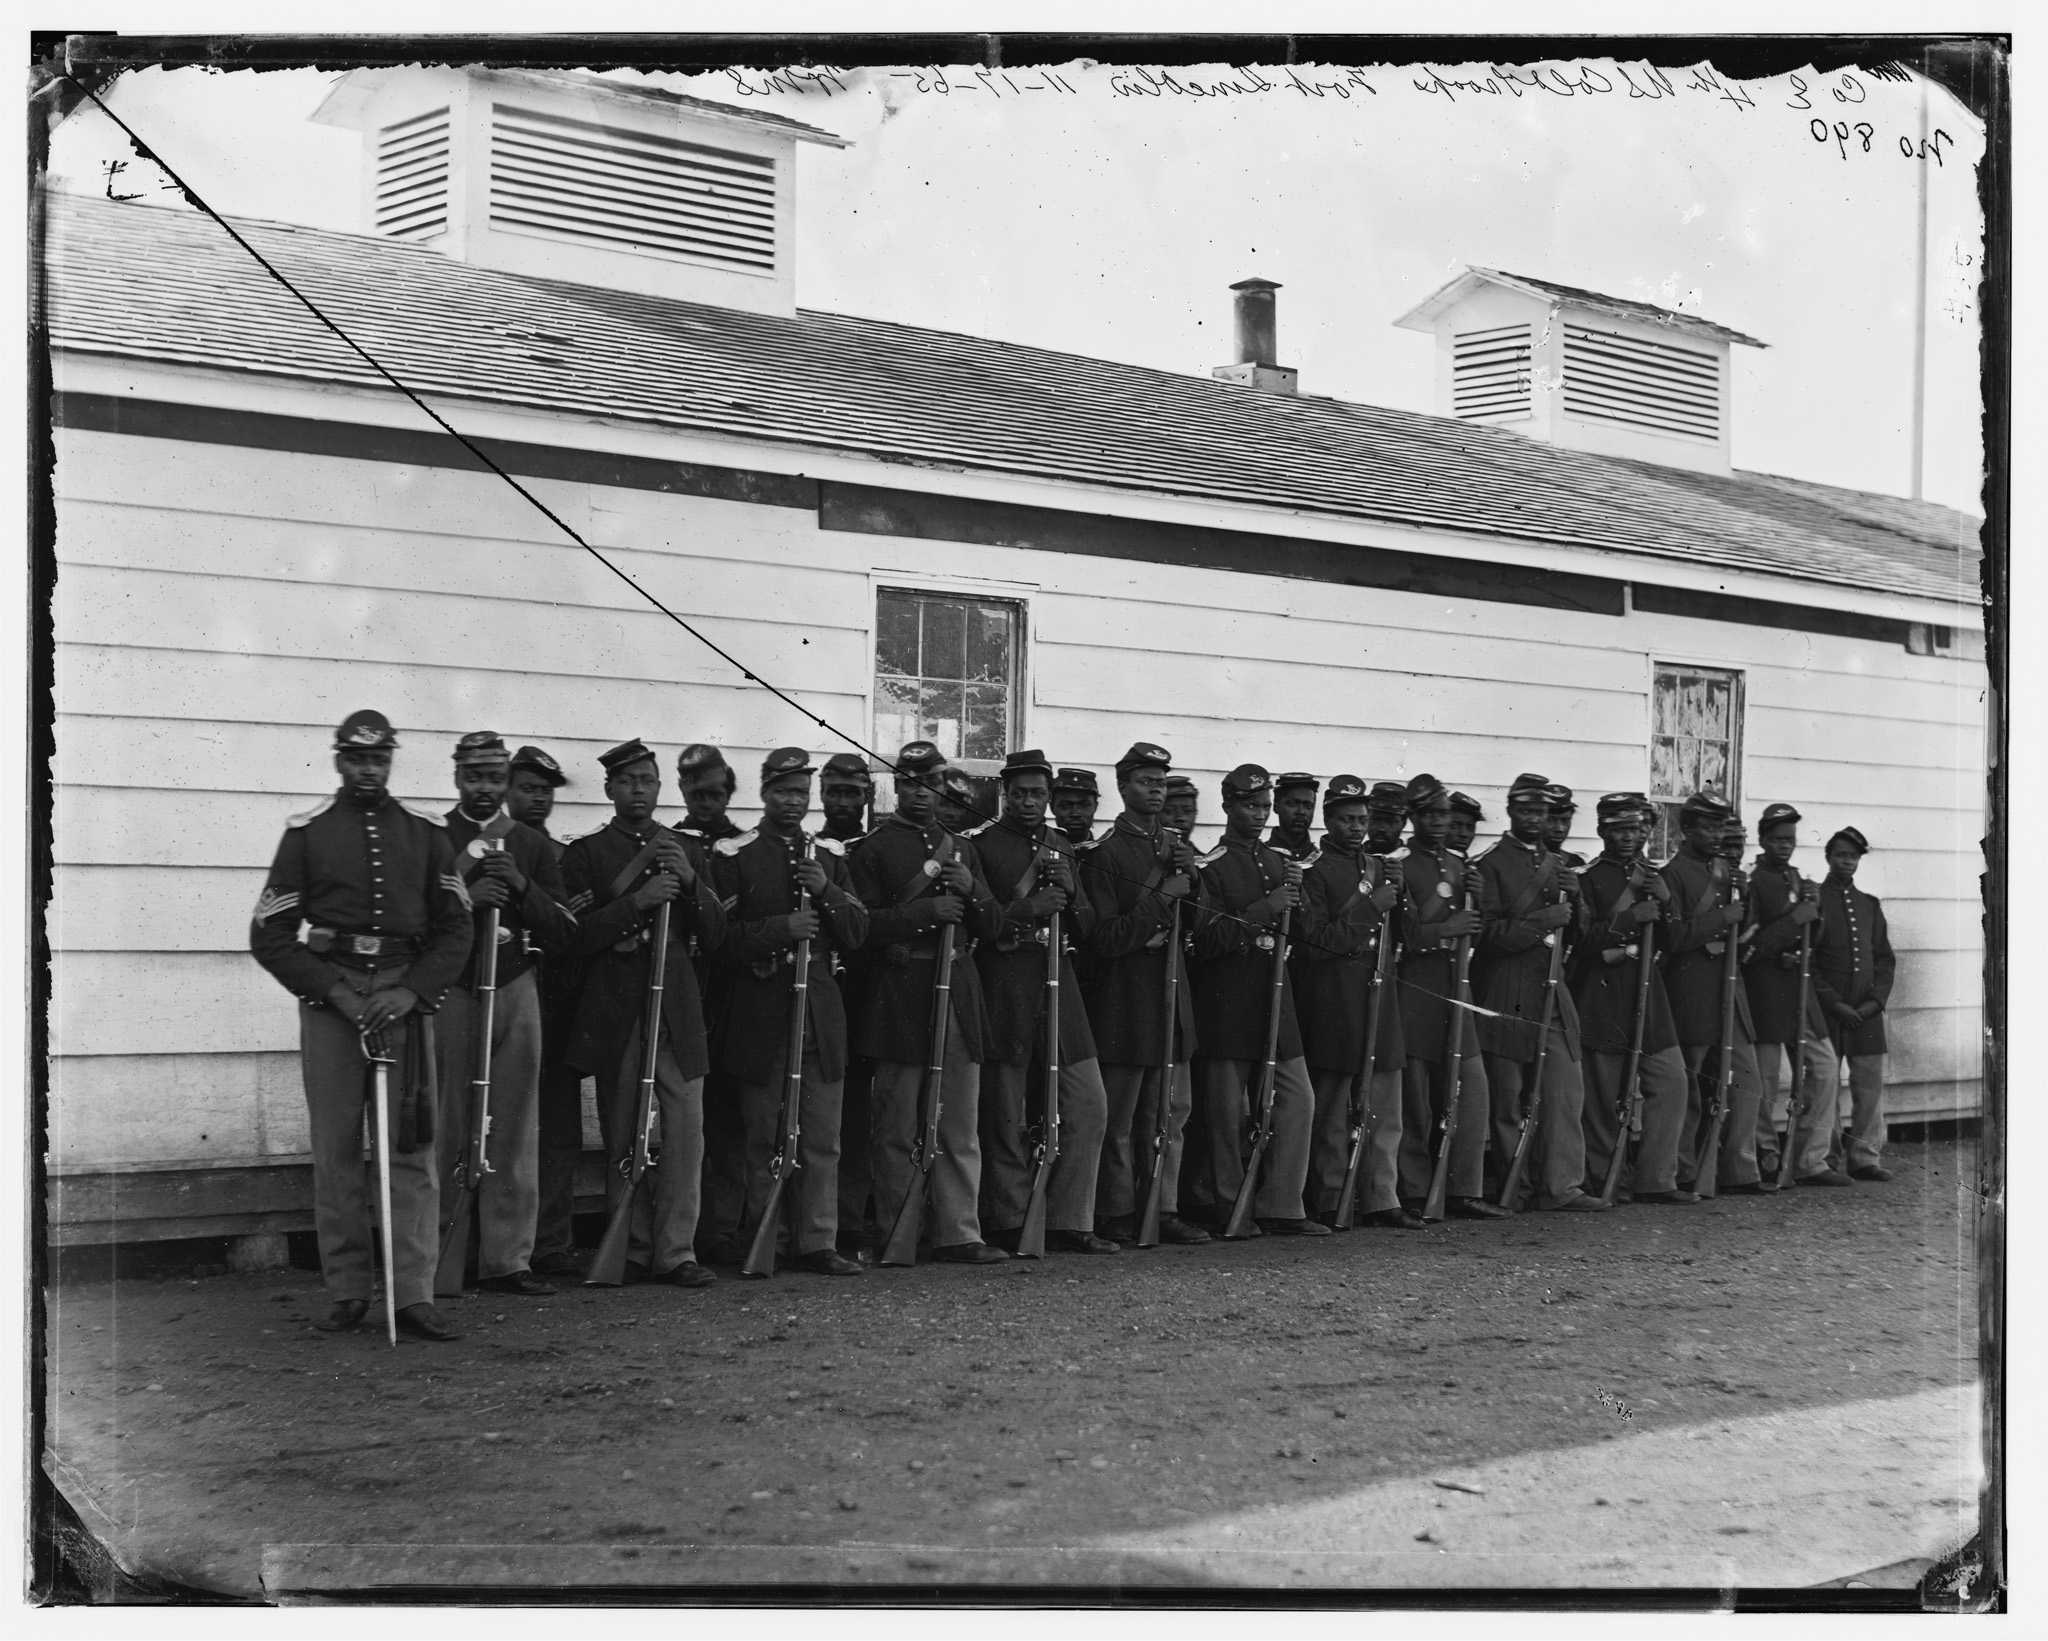 Photograph of African American Troops at Ft. Lincoln, District of Columbia